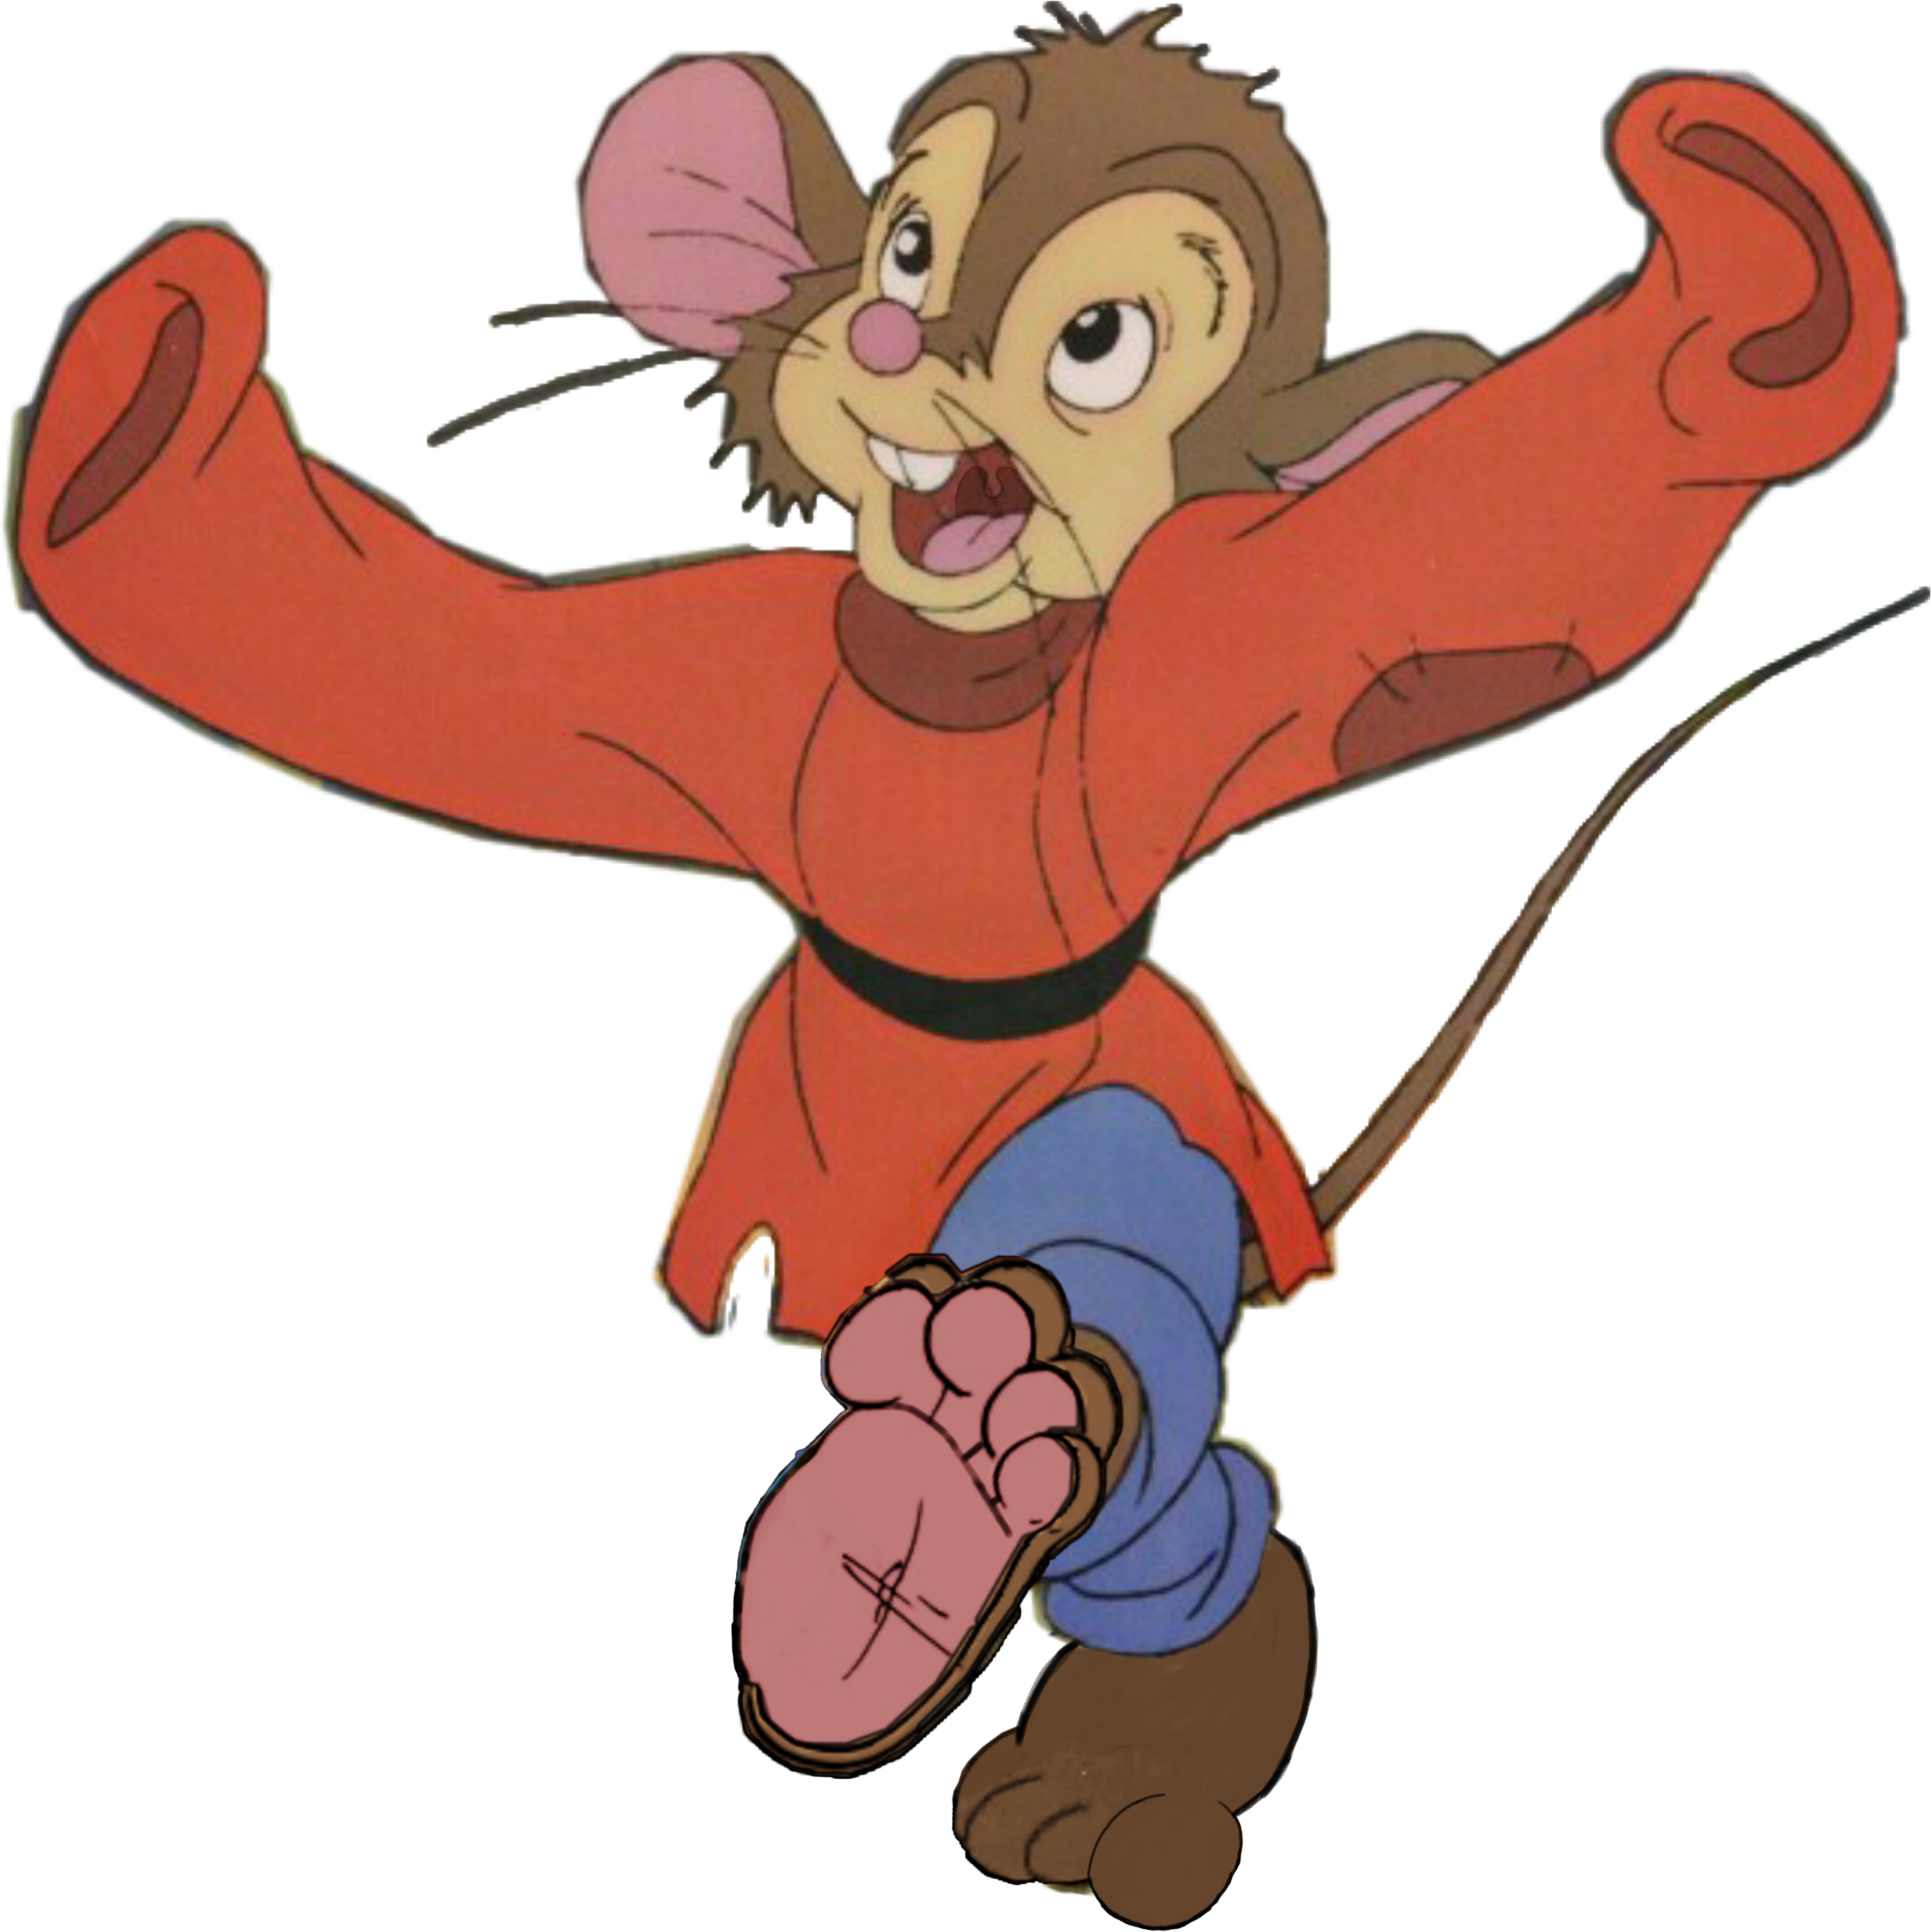 Cartoon Mouse With Arms Outstretched